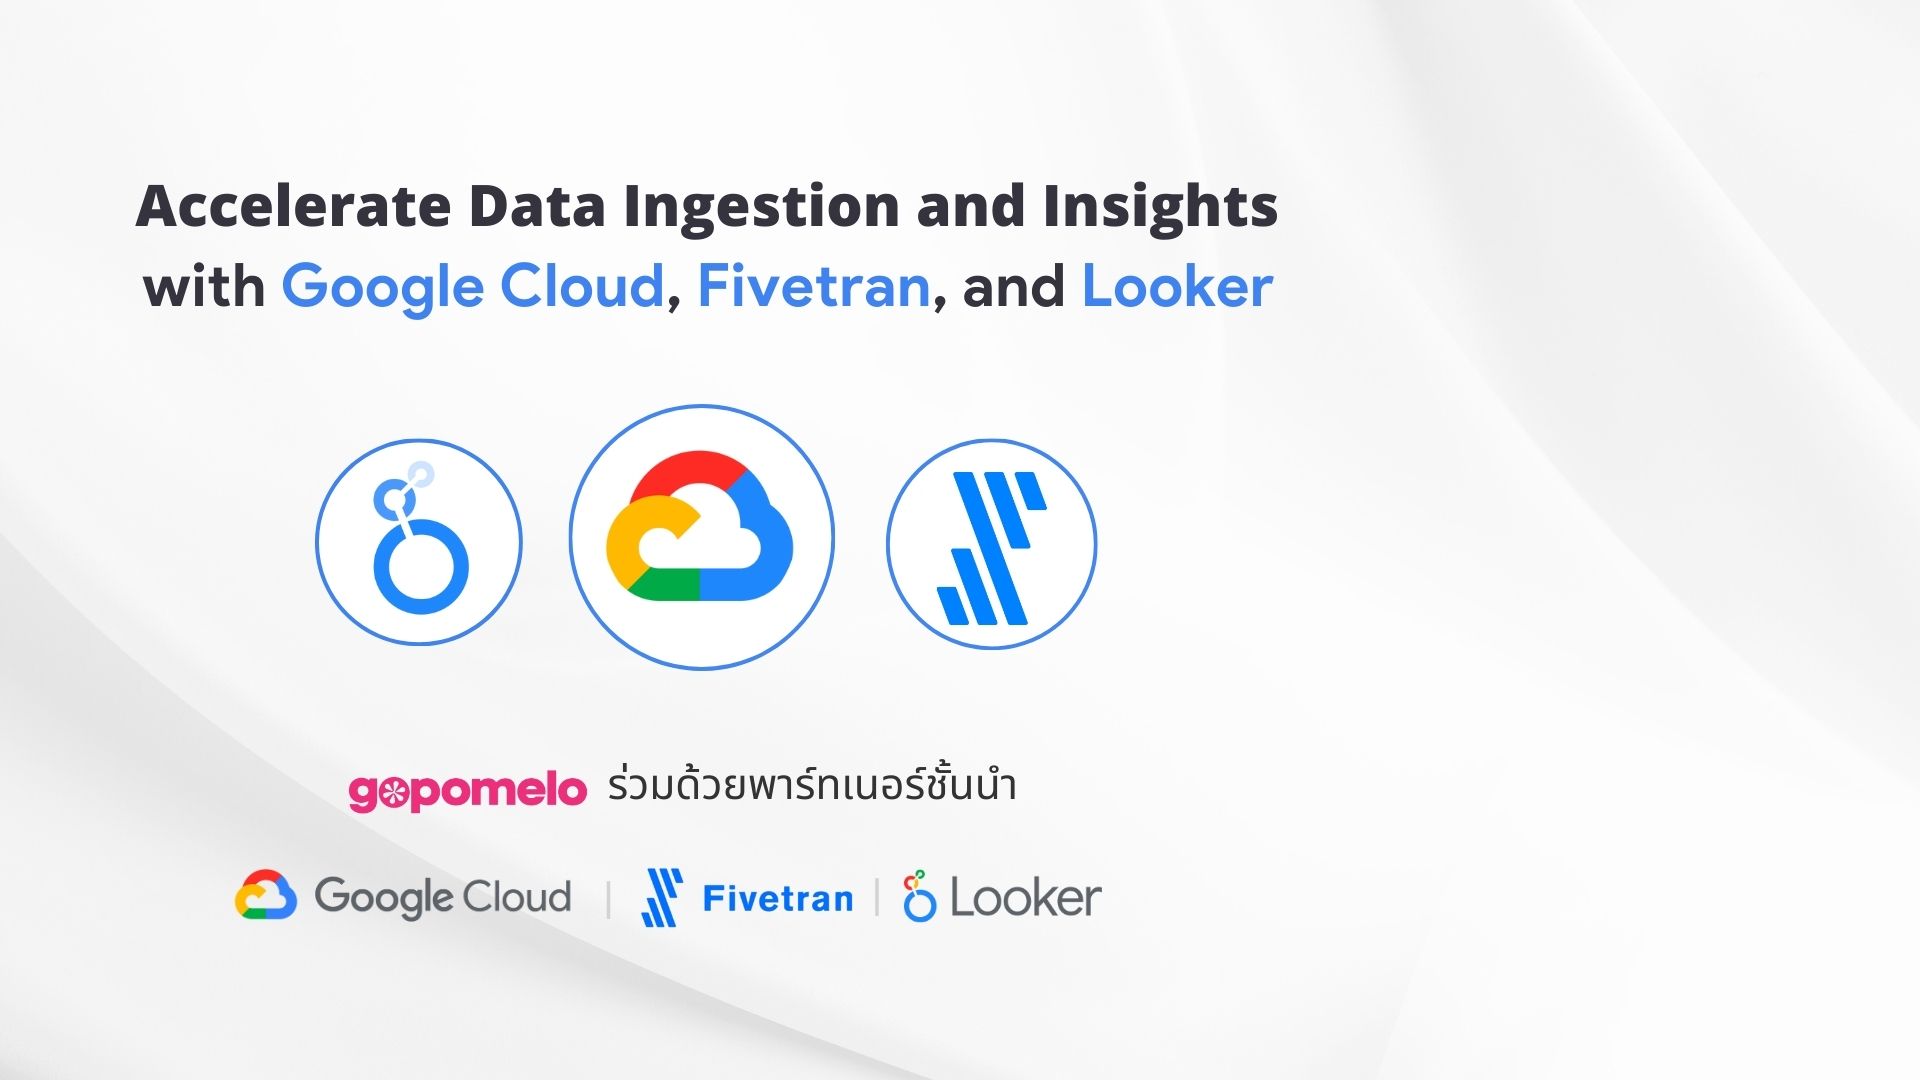 Accelerate data ingestion and insights with GCP, Fivetran, and Looker